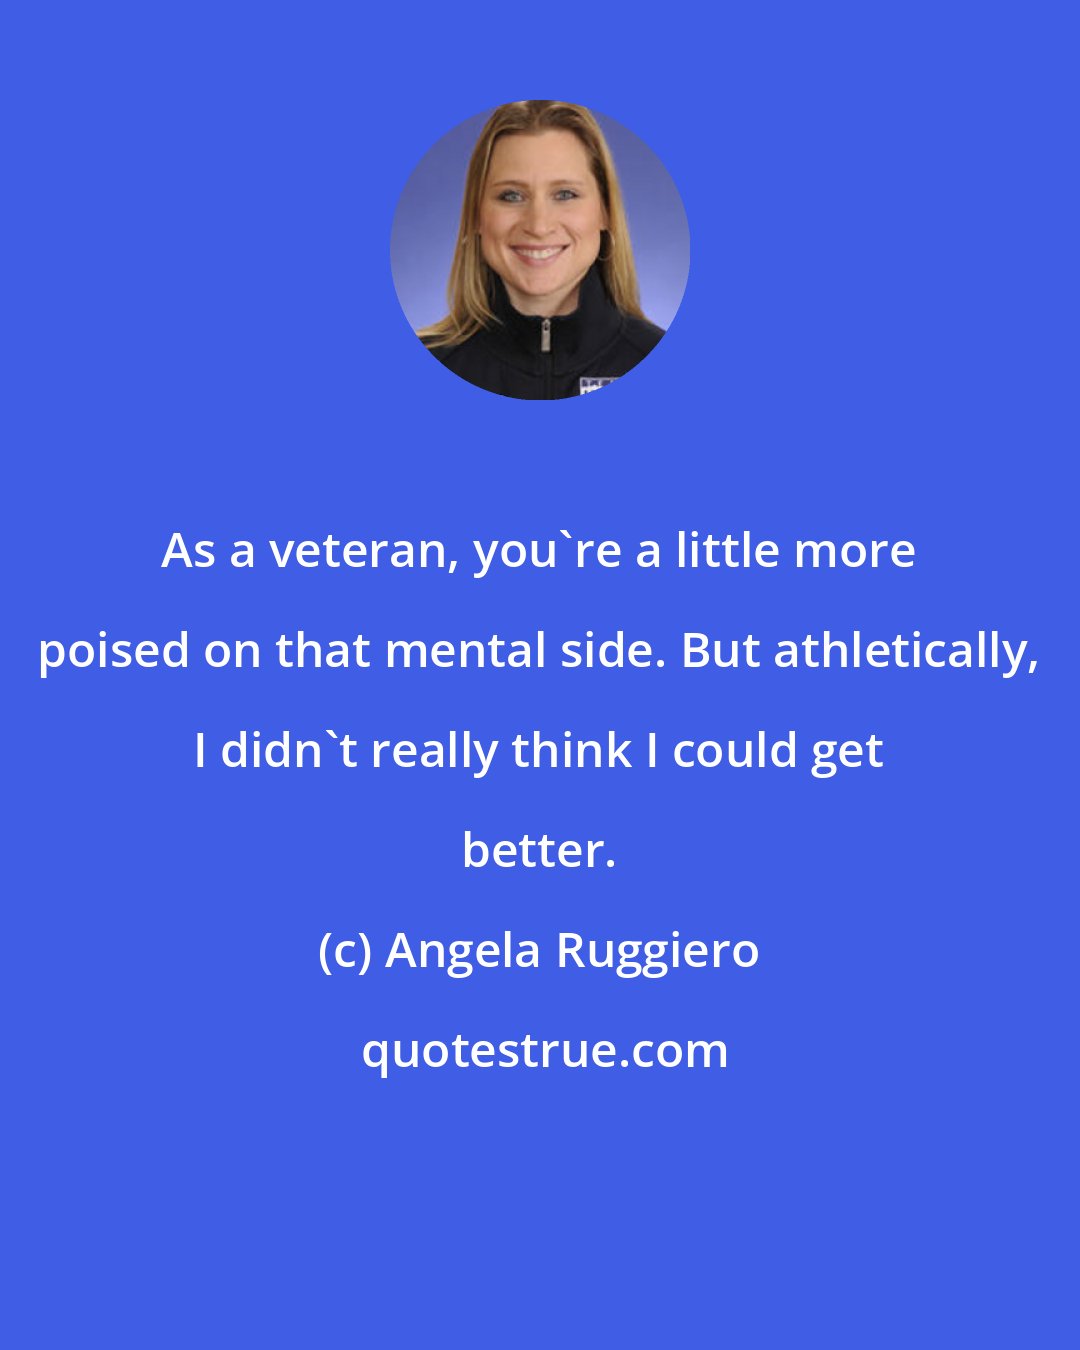 Angela Ruggiero: As a veteran, you're a little more poised on that mental side. But athletically, I didn't really think I could get better.